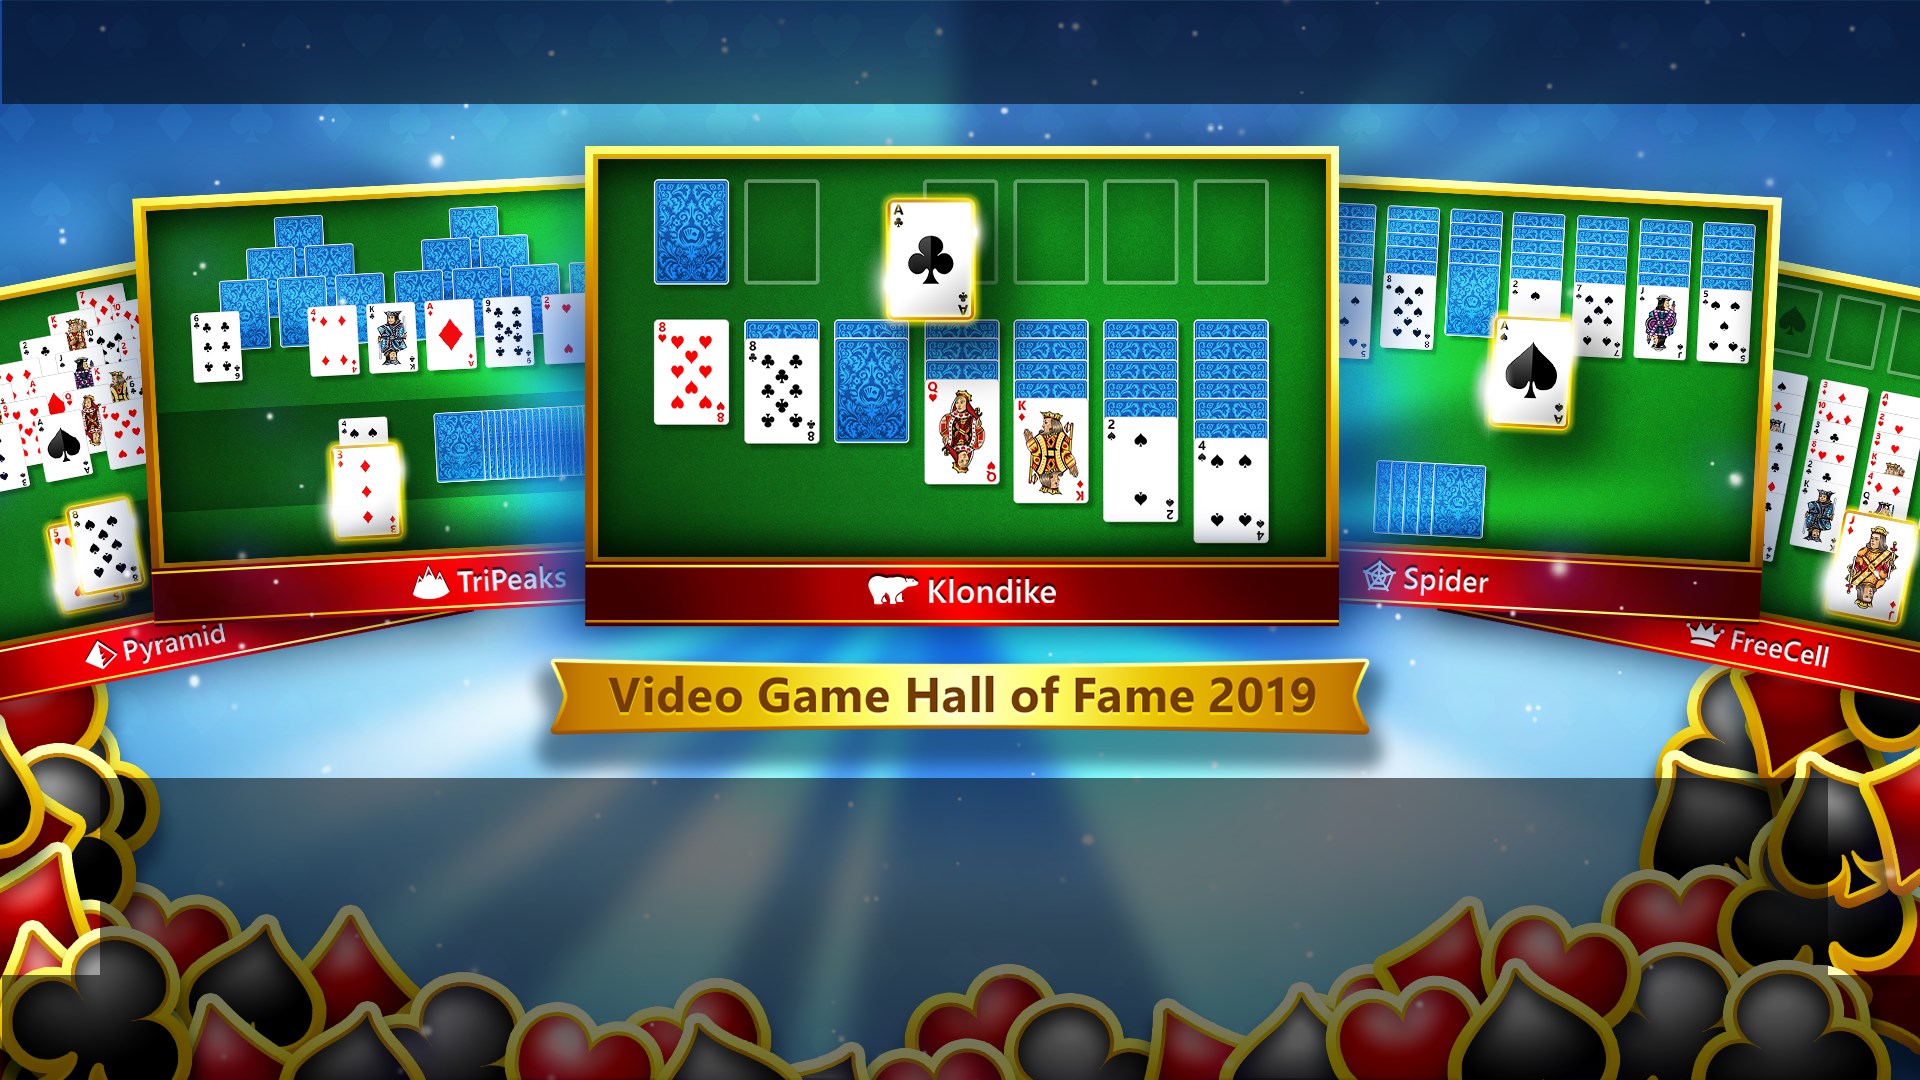 Obter o Microsoft Solitaire Collection